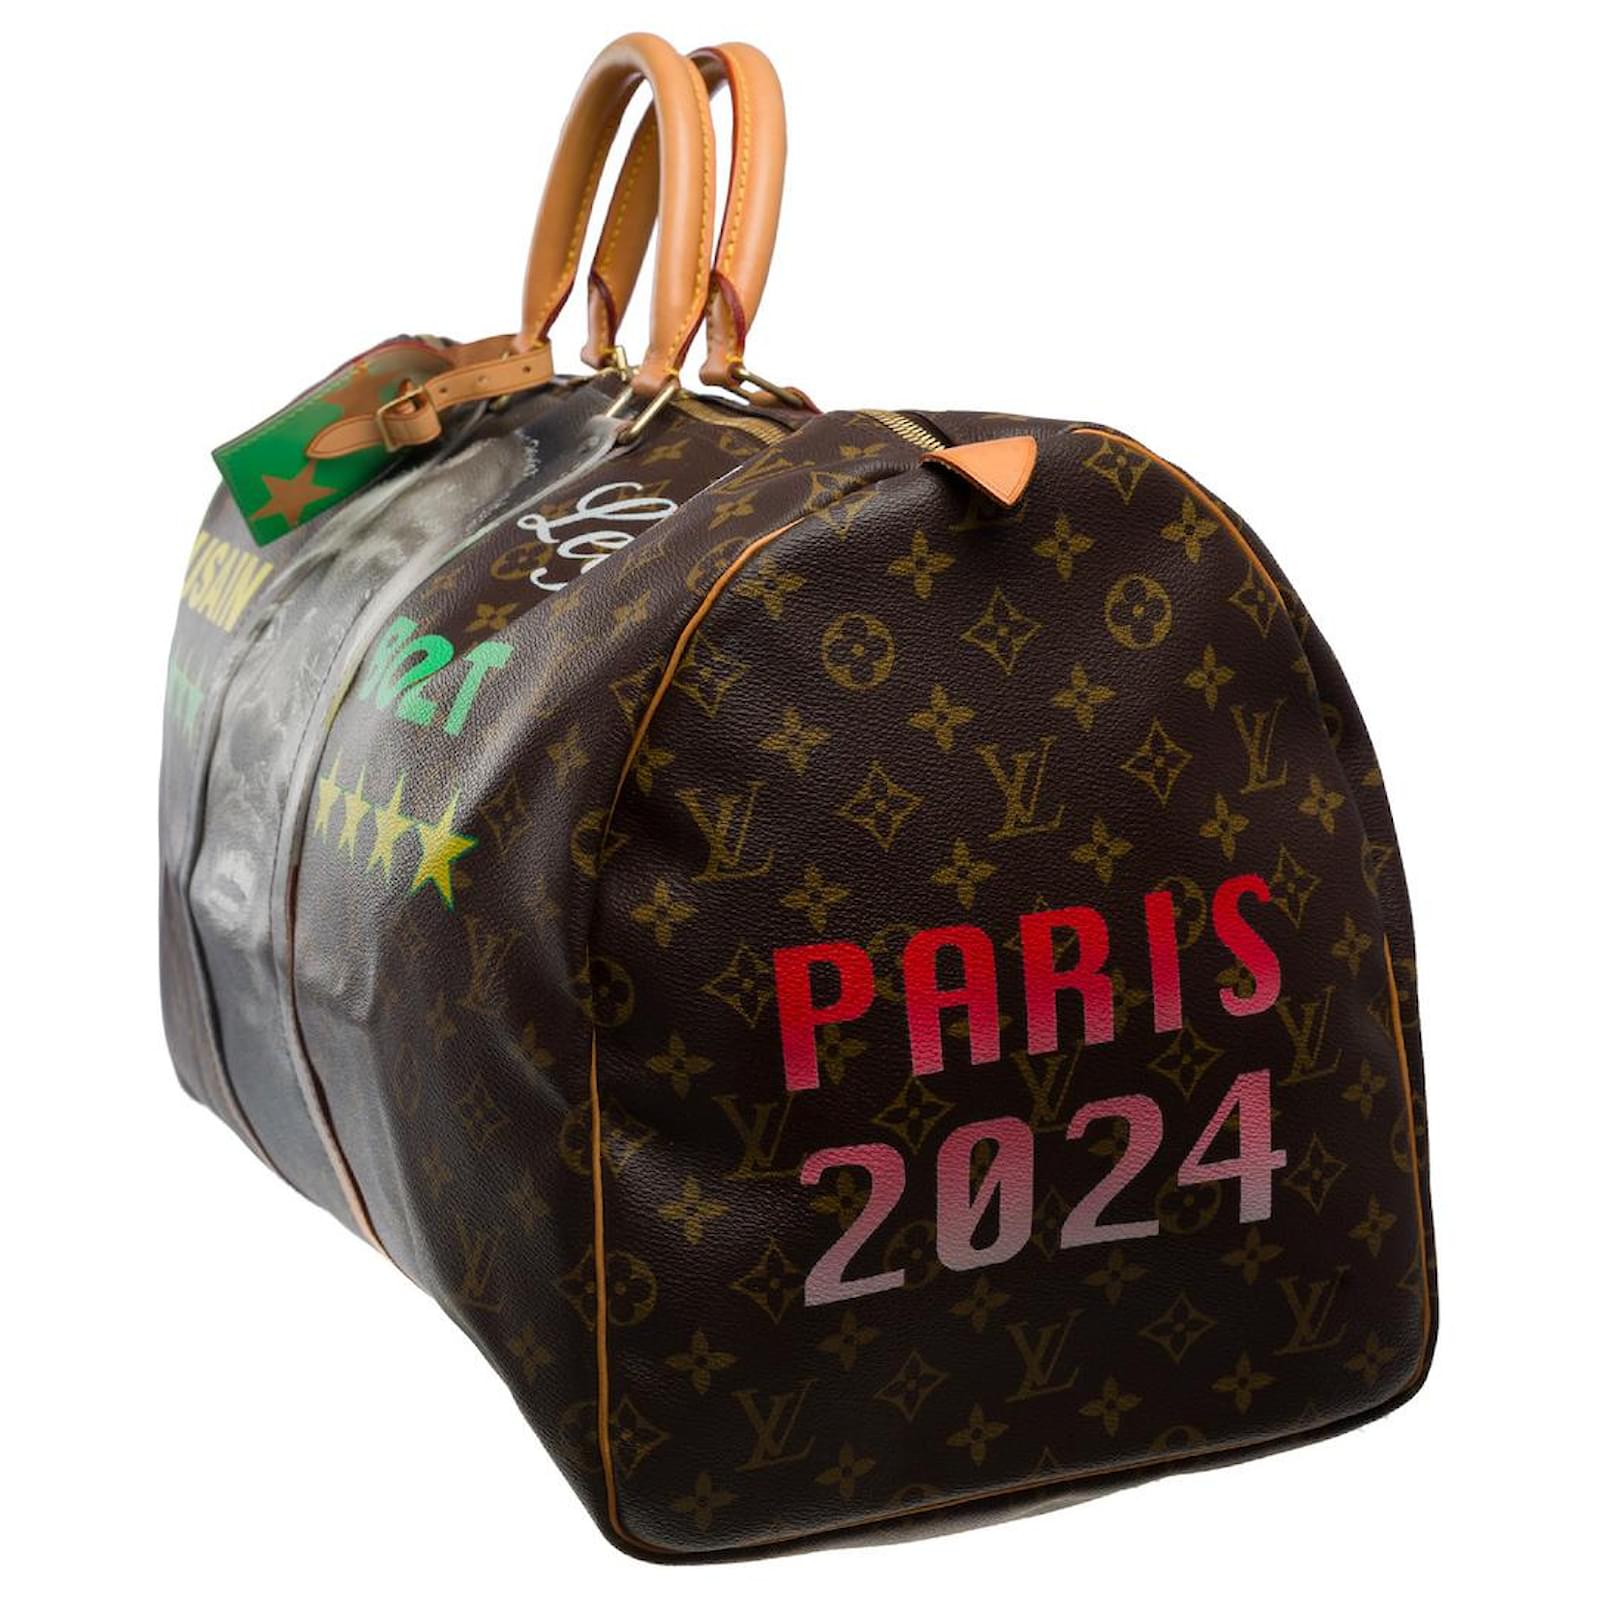 Misc Louis Vuitton Louis Vuitton Keepall Bandouliere America's Cup World Series Limited Edition Bag in Damier Graphite Canvas